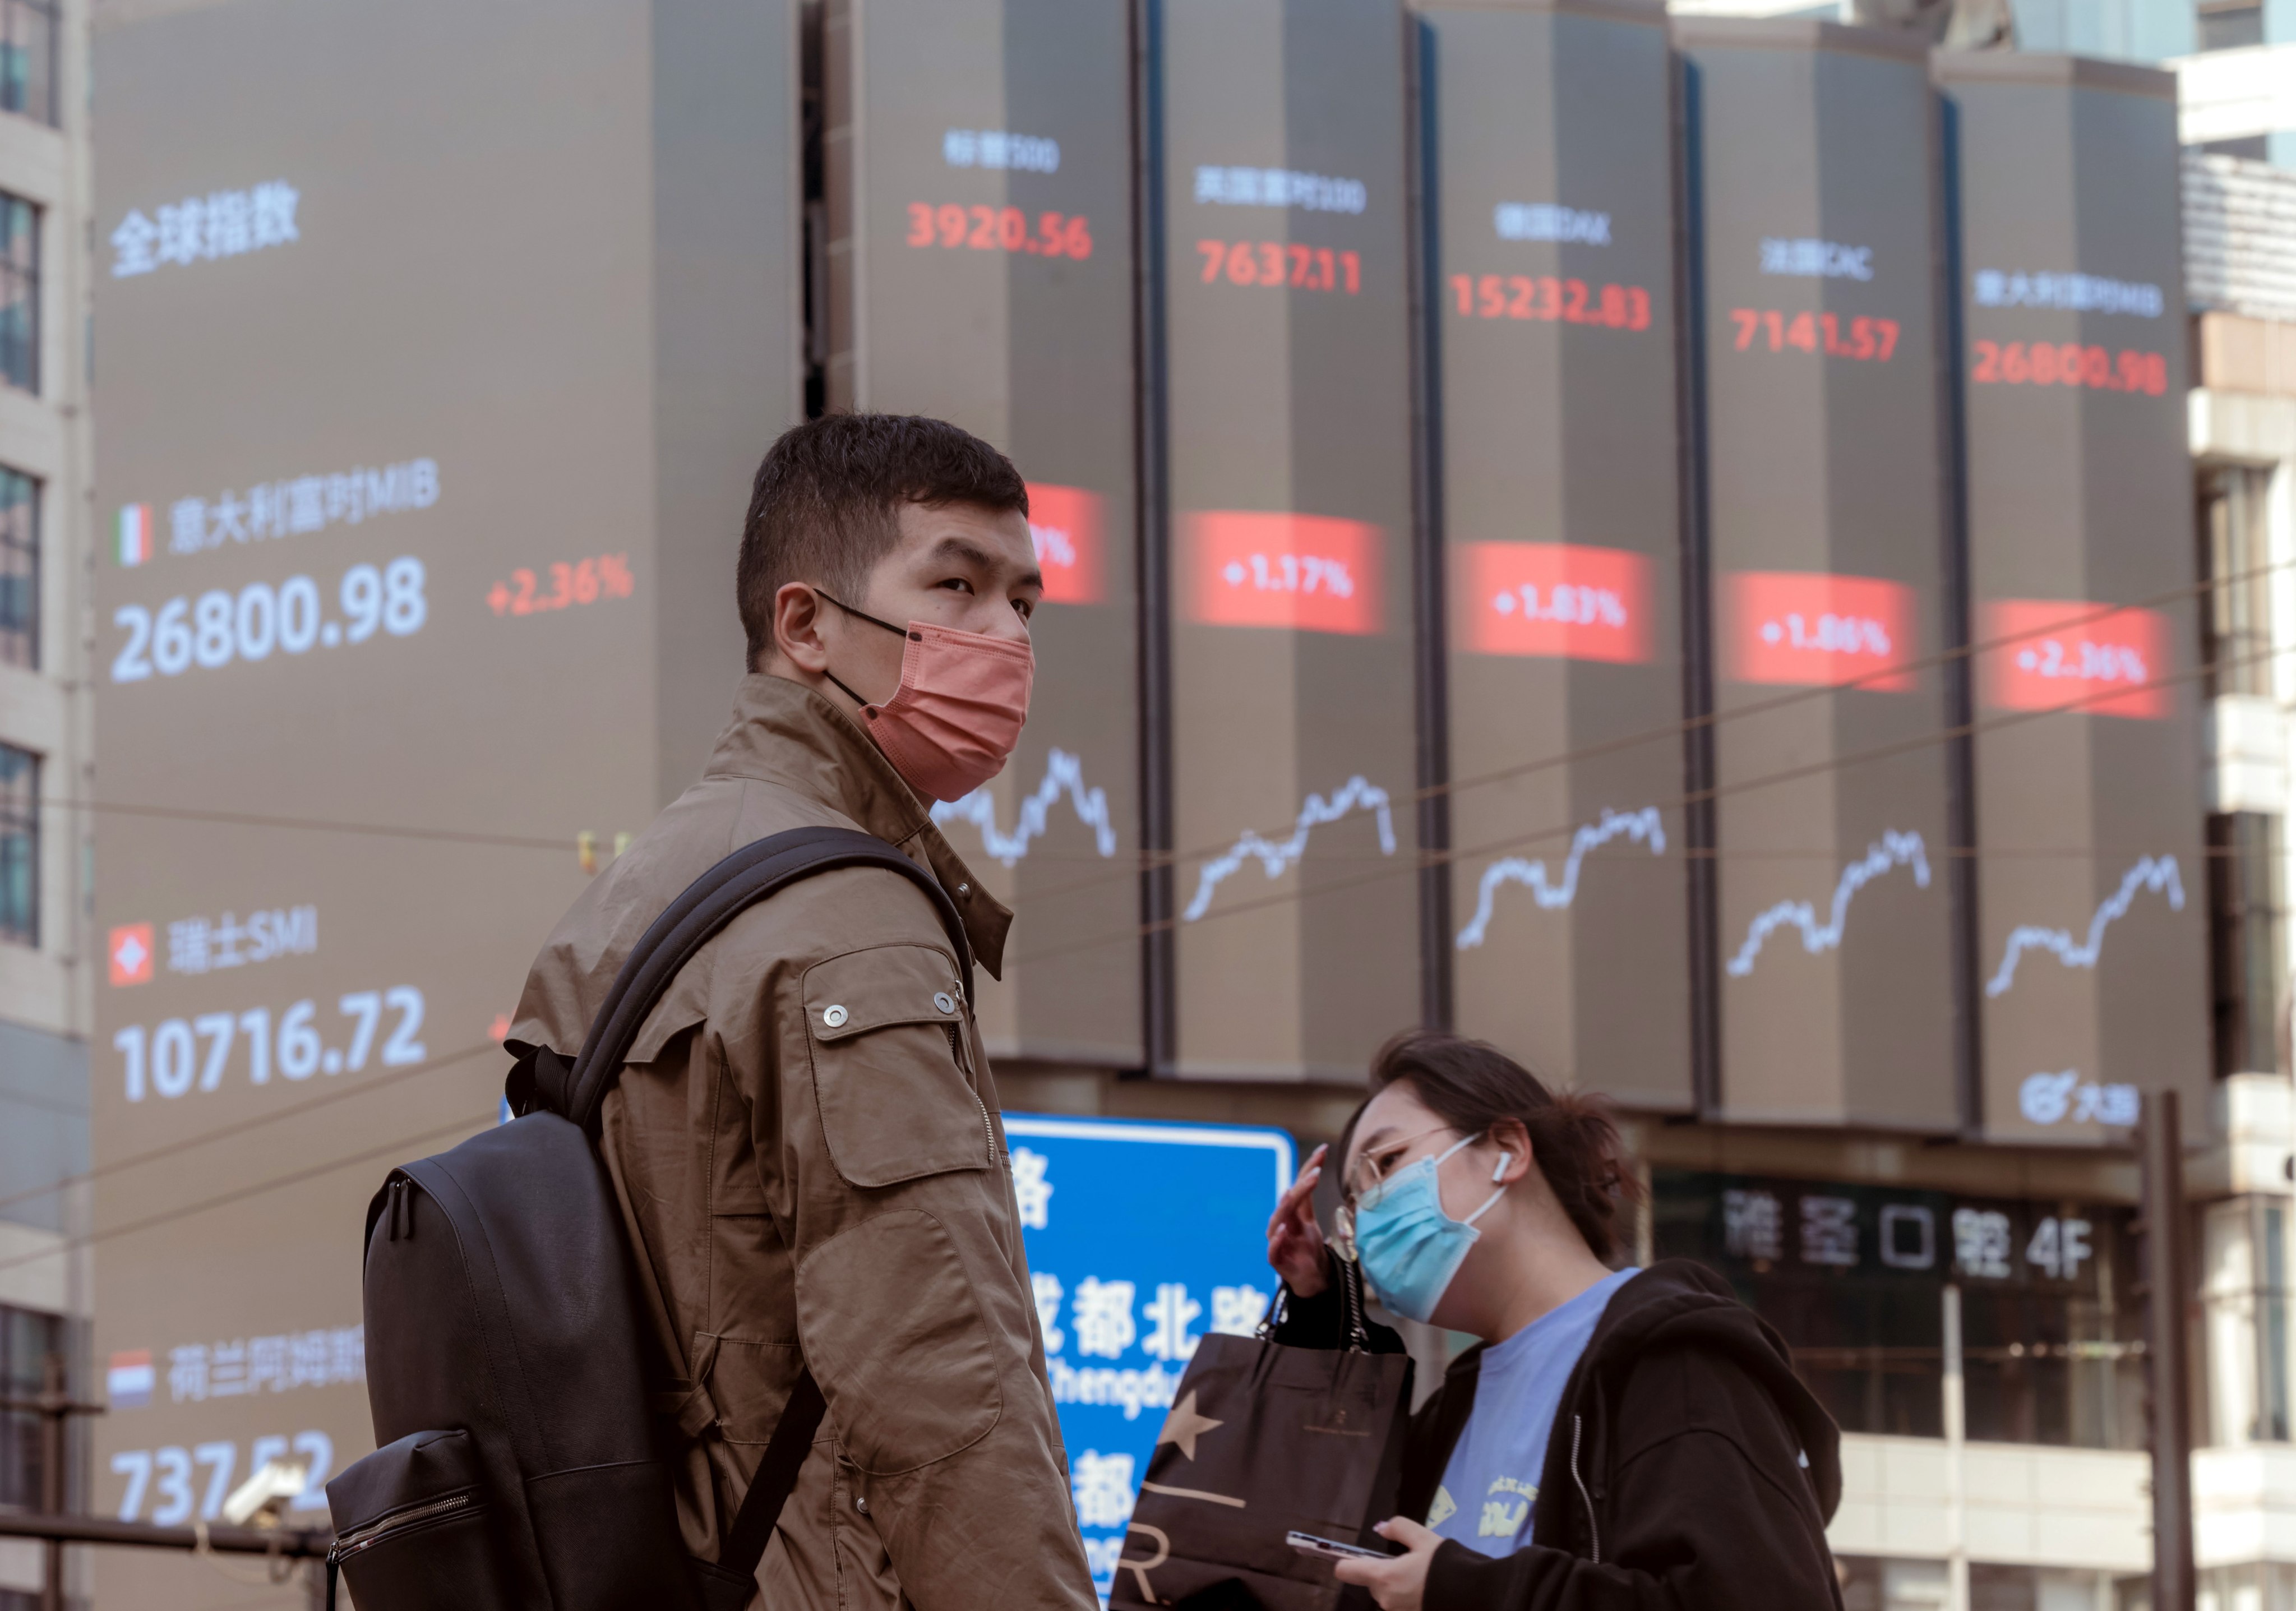 People walk past a large screen showing stock exchange data in Shanghai. The Shanghai Composite Index has risen 15 per cent from an October low. Photo: EPA-EFE